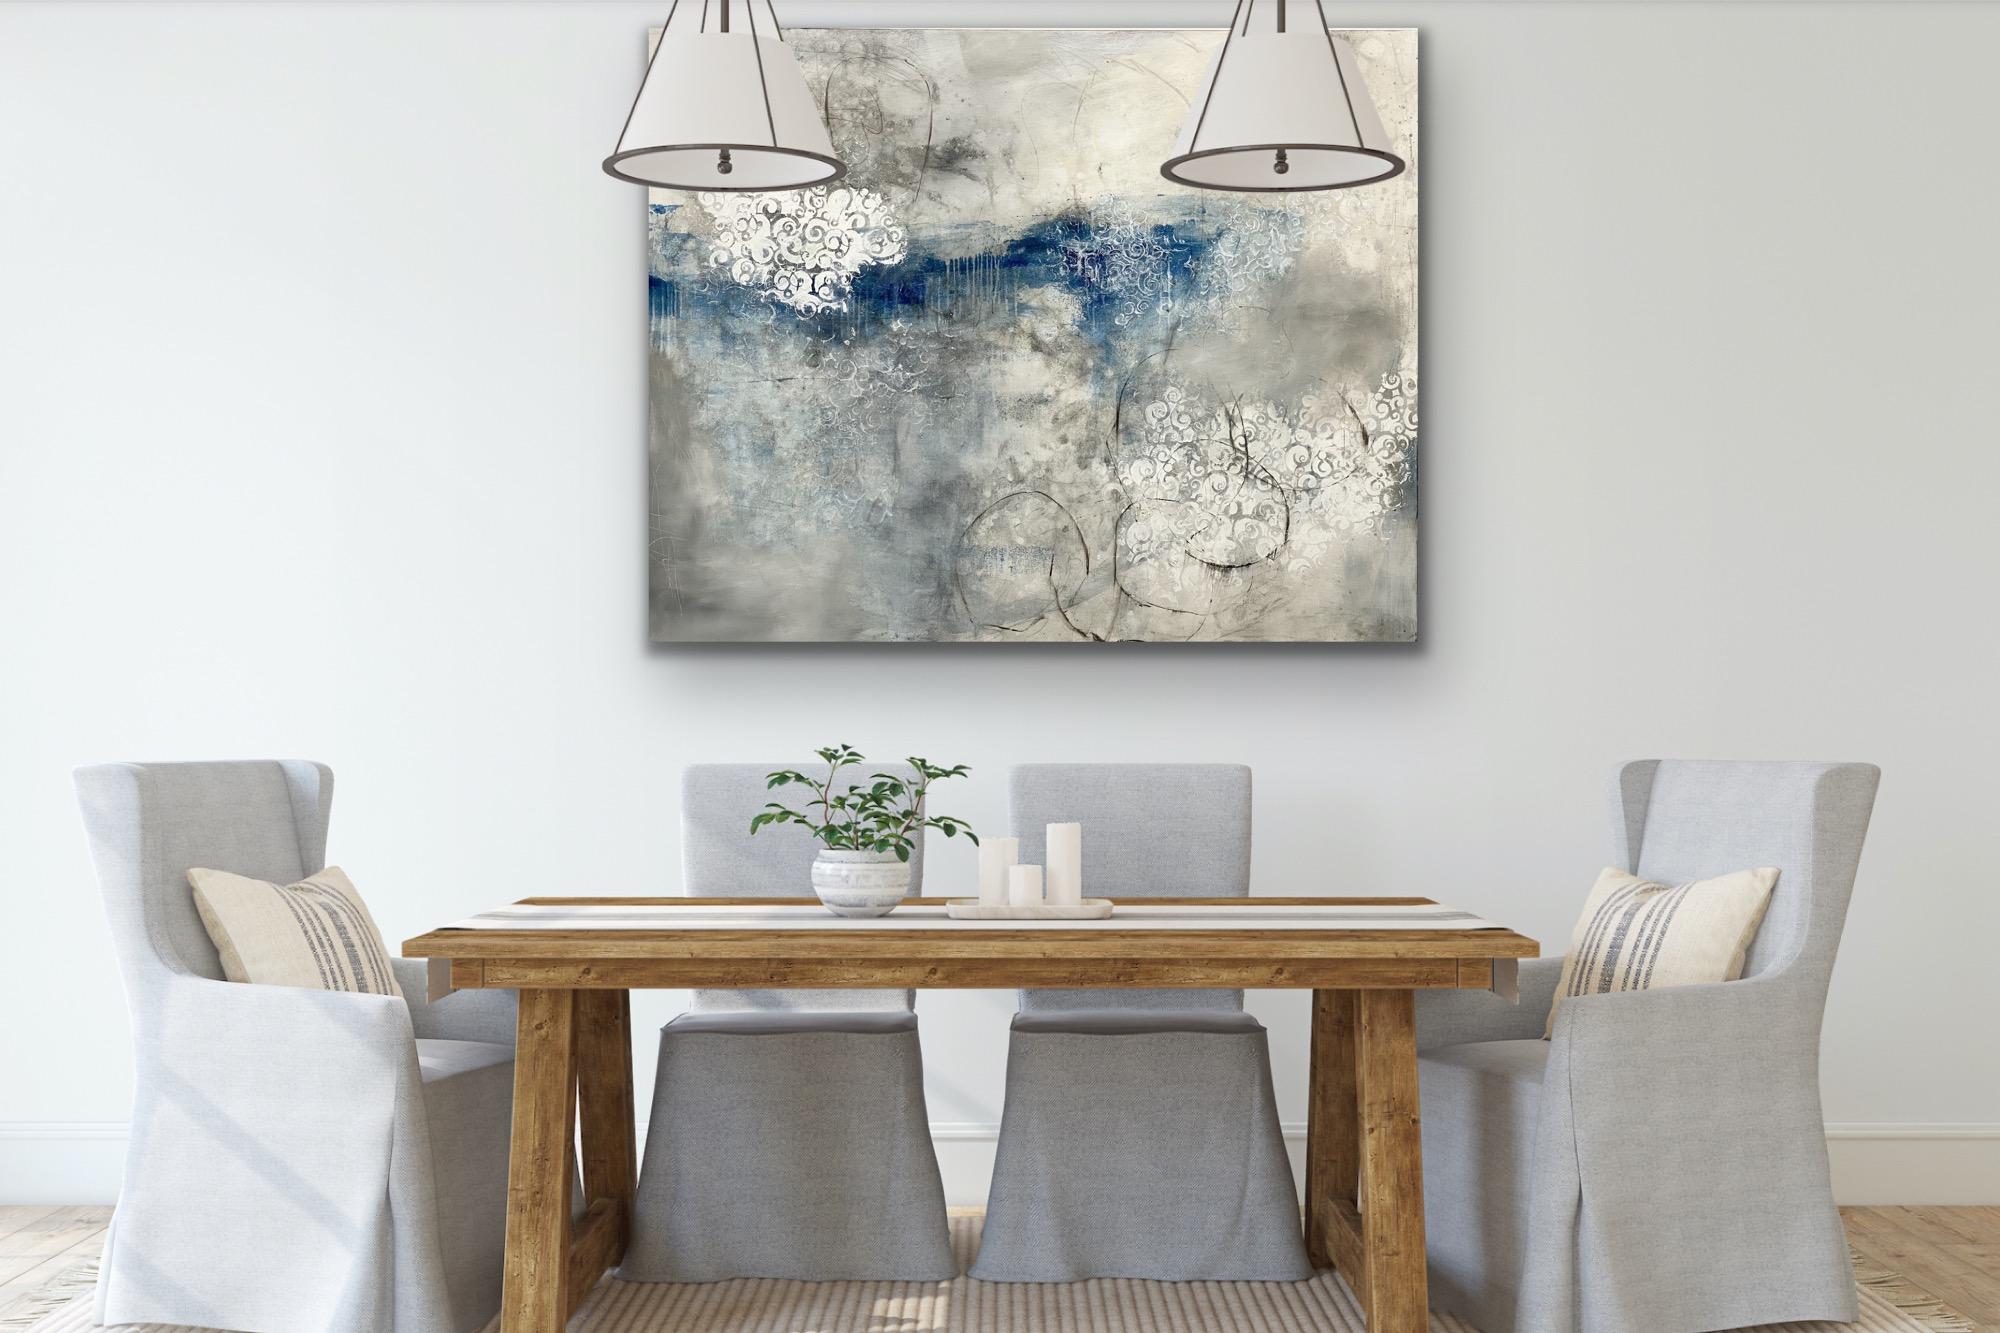 Pool of tranquility,  Contemporary seascape, blue, ocean, 2020, Acrylic on canva - Painting by Juanita Bellavance 